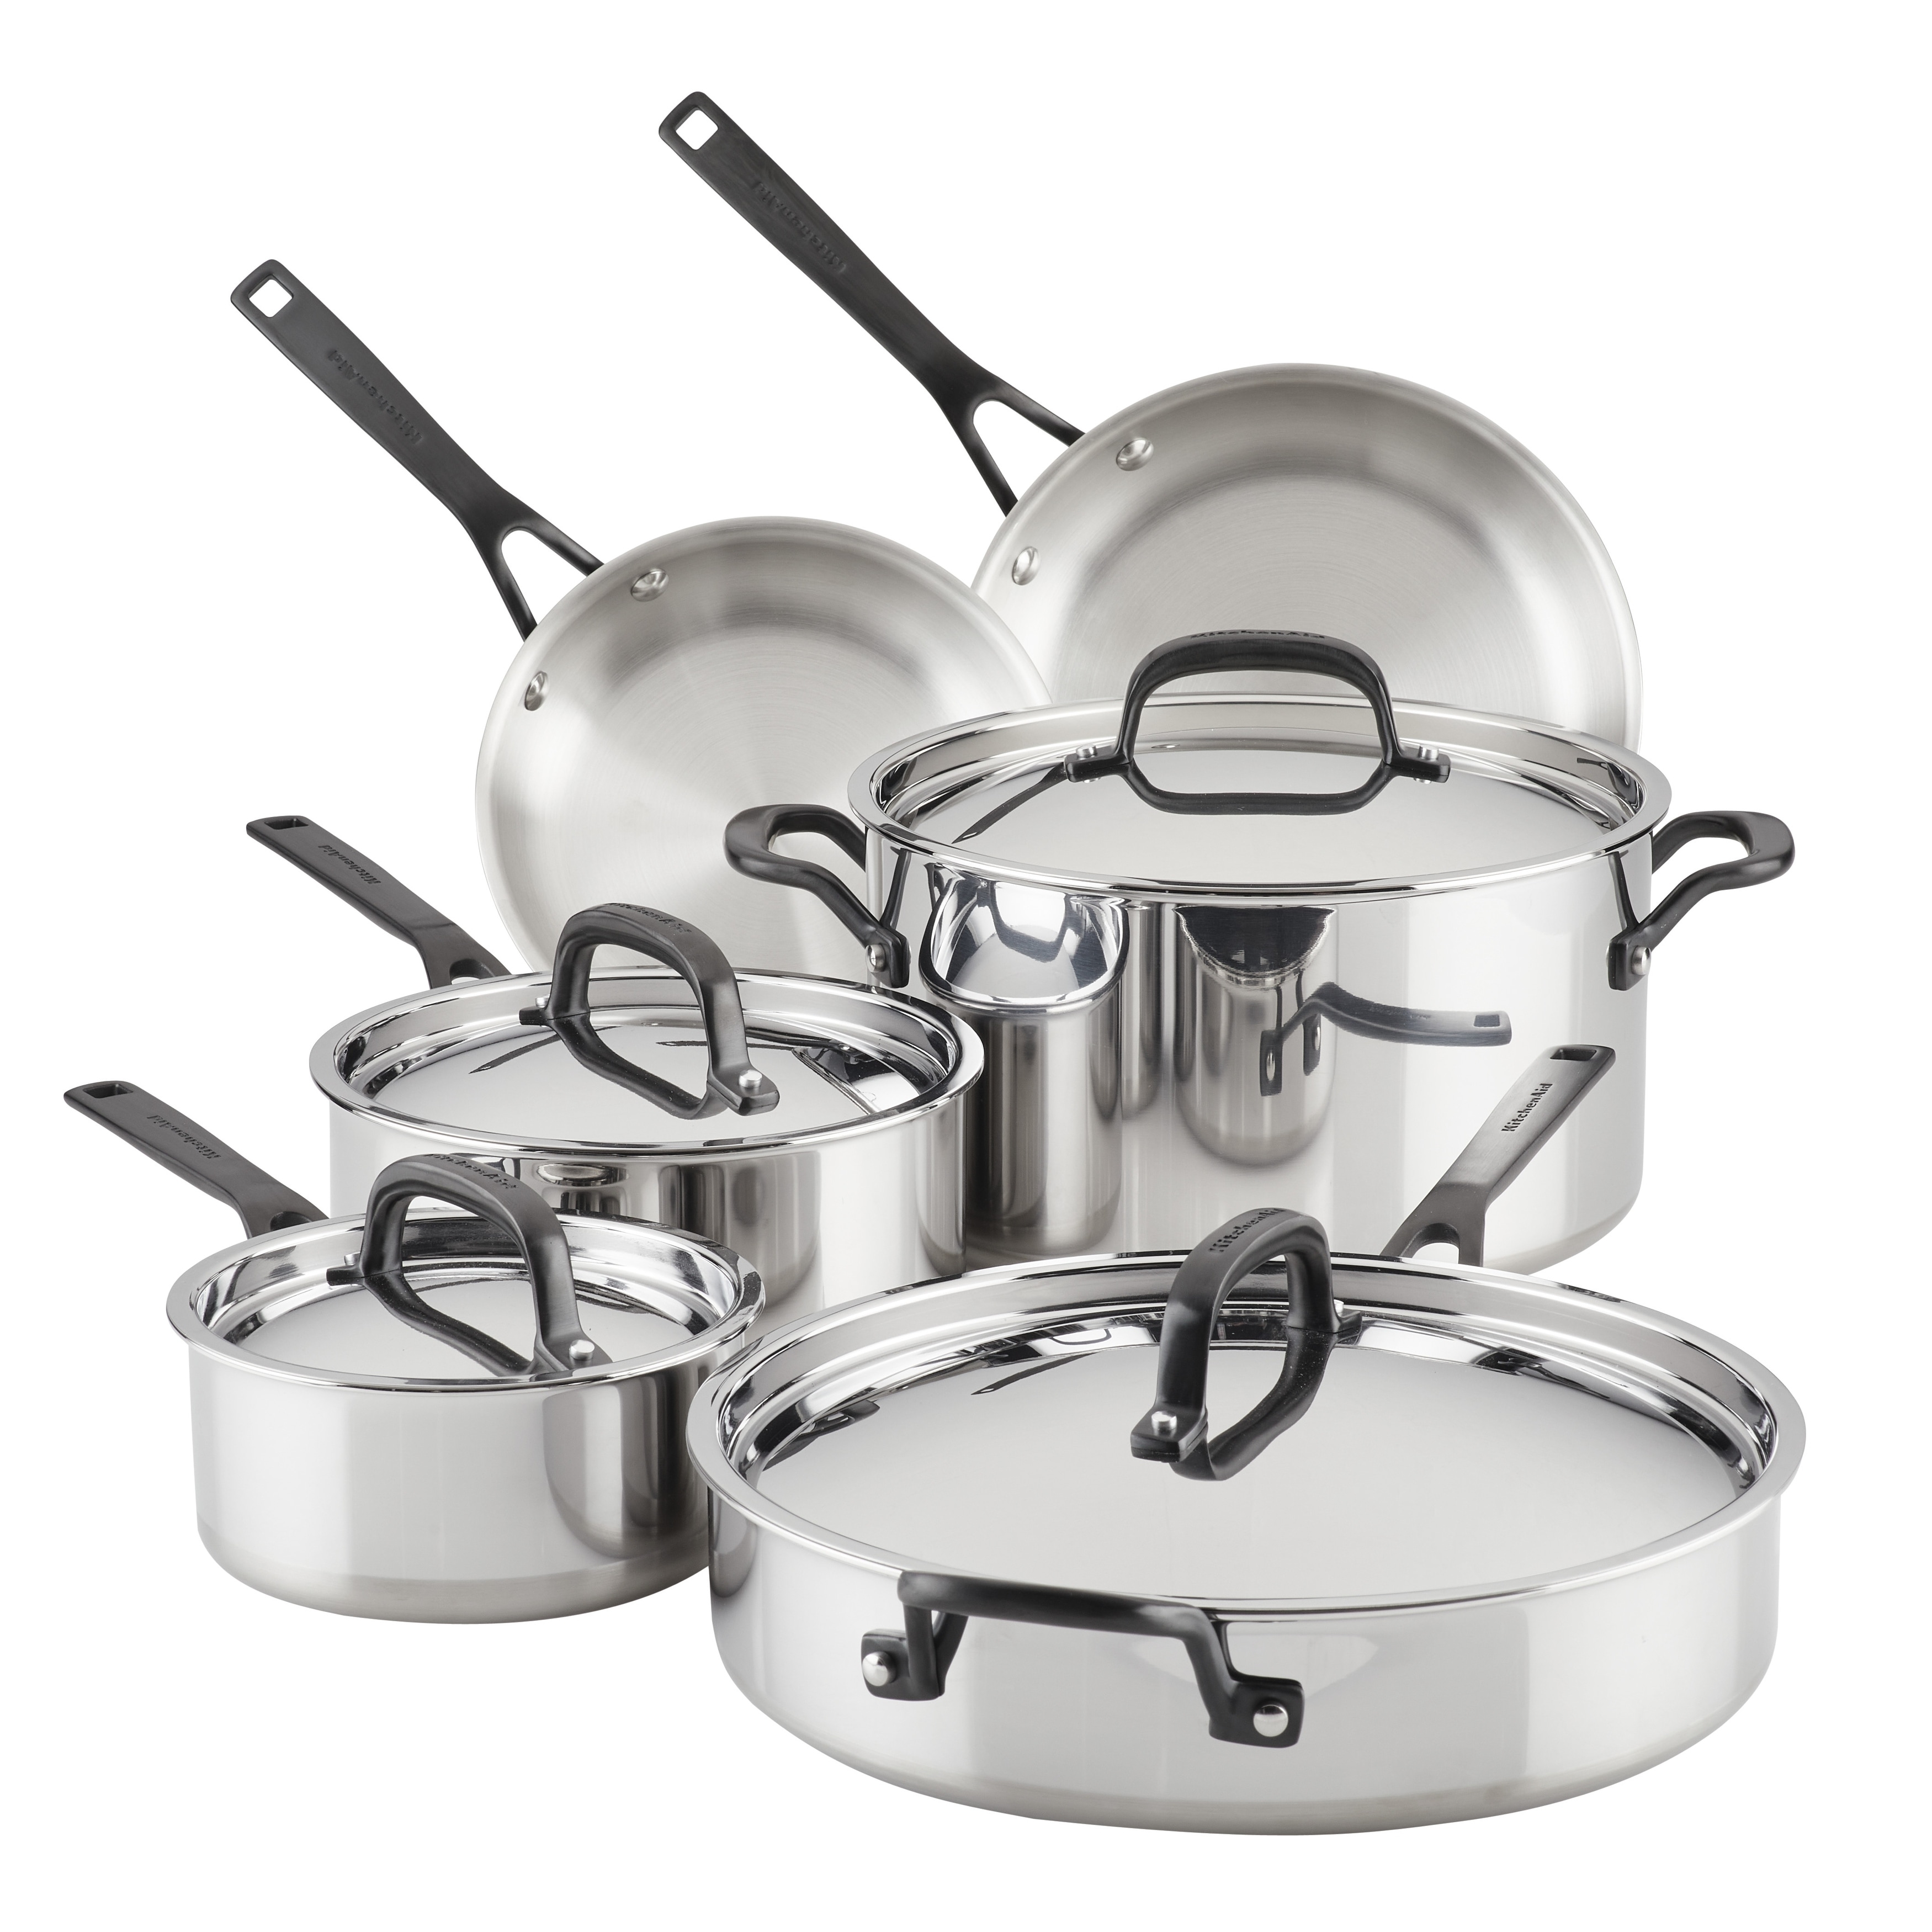 Gotham Steel Premium Tri-Ply Stainless Steel Pots and Pans Set, 10 Pieces